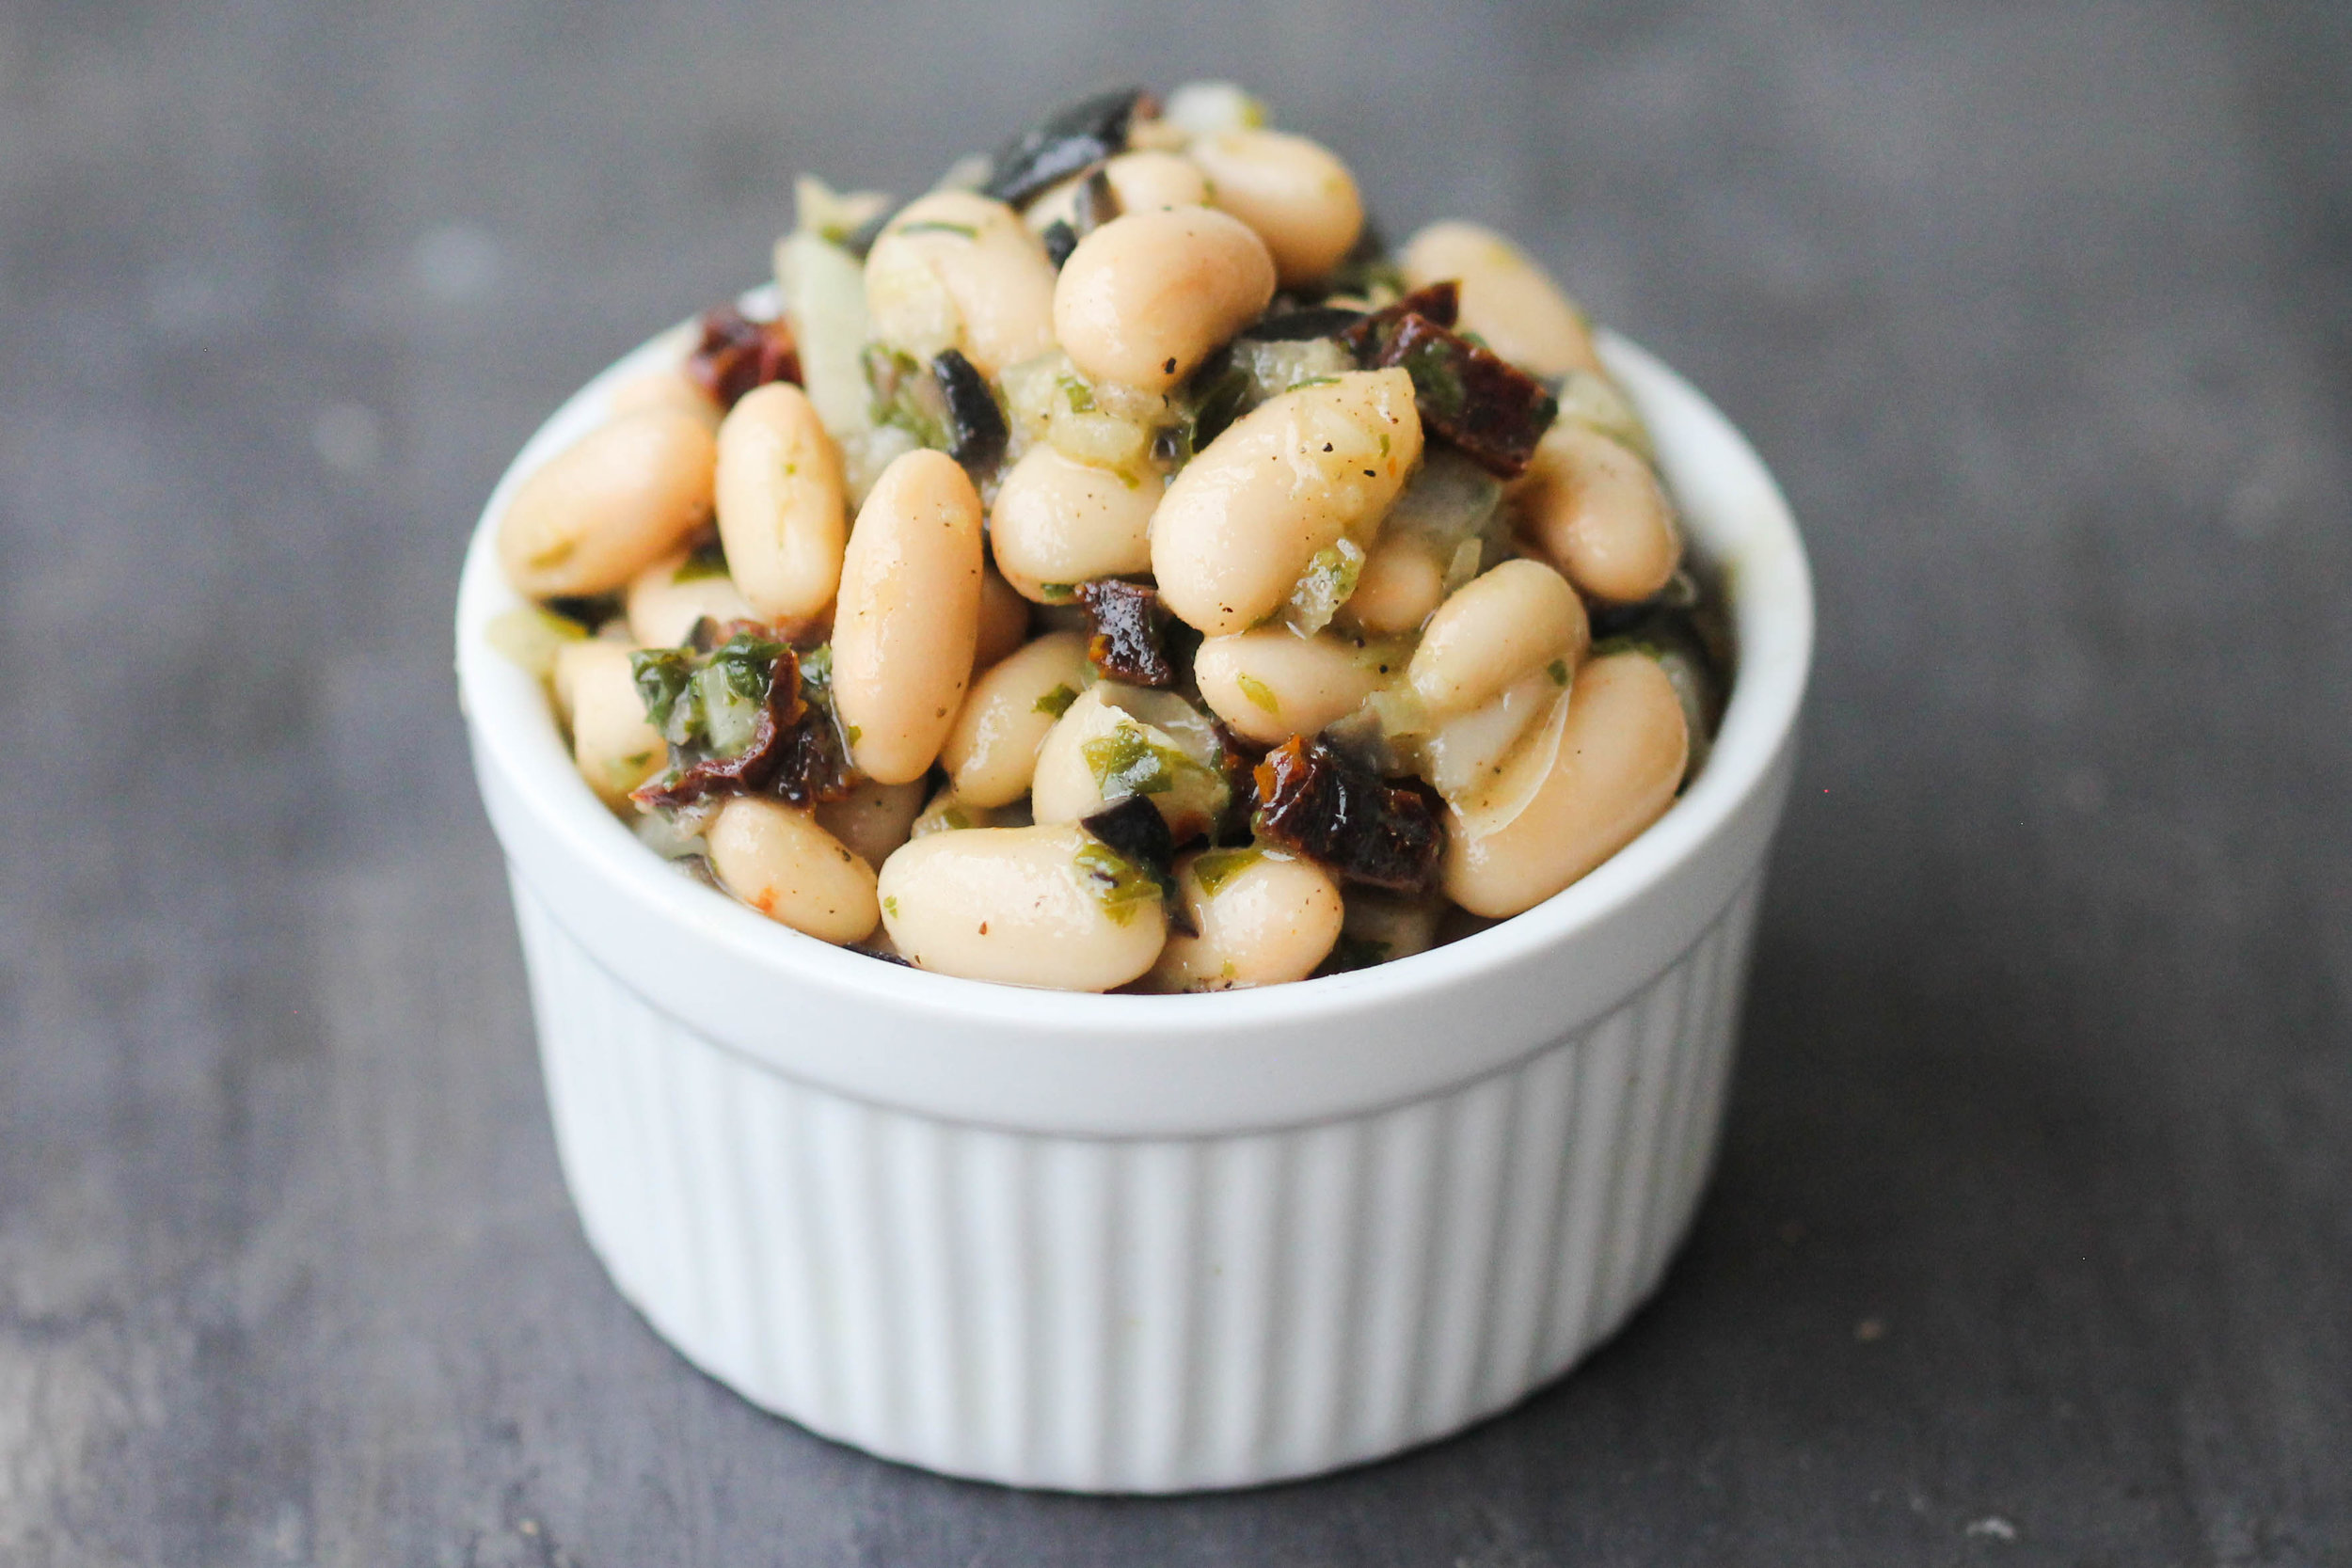 Cannellini Bean Salad with Basil and Sun-Dried Tomatoes makes a lovely light lunch or can be enjoyed as a refreshing side, or take it to a picnic, potluck. It is naturally vegan & gluten-free.